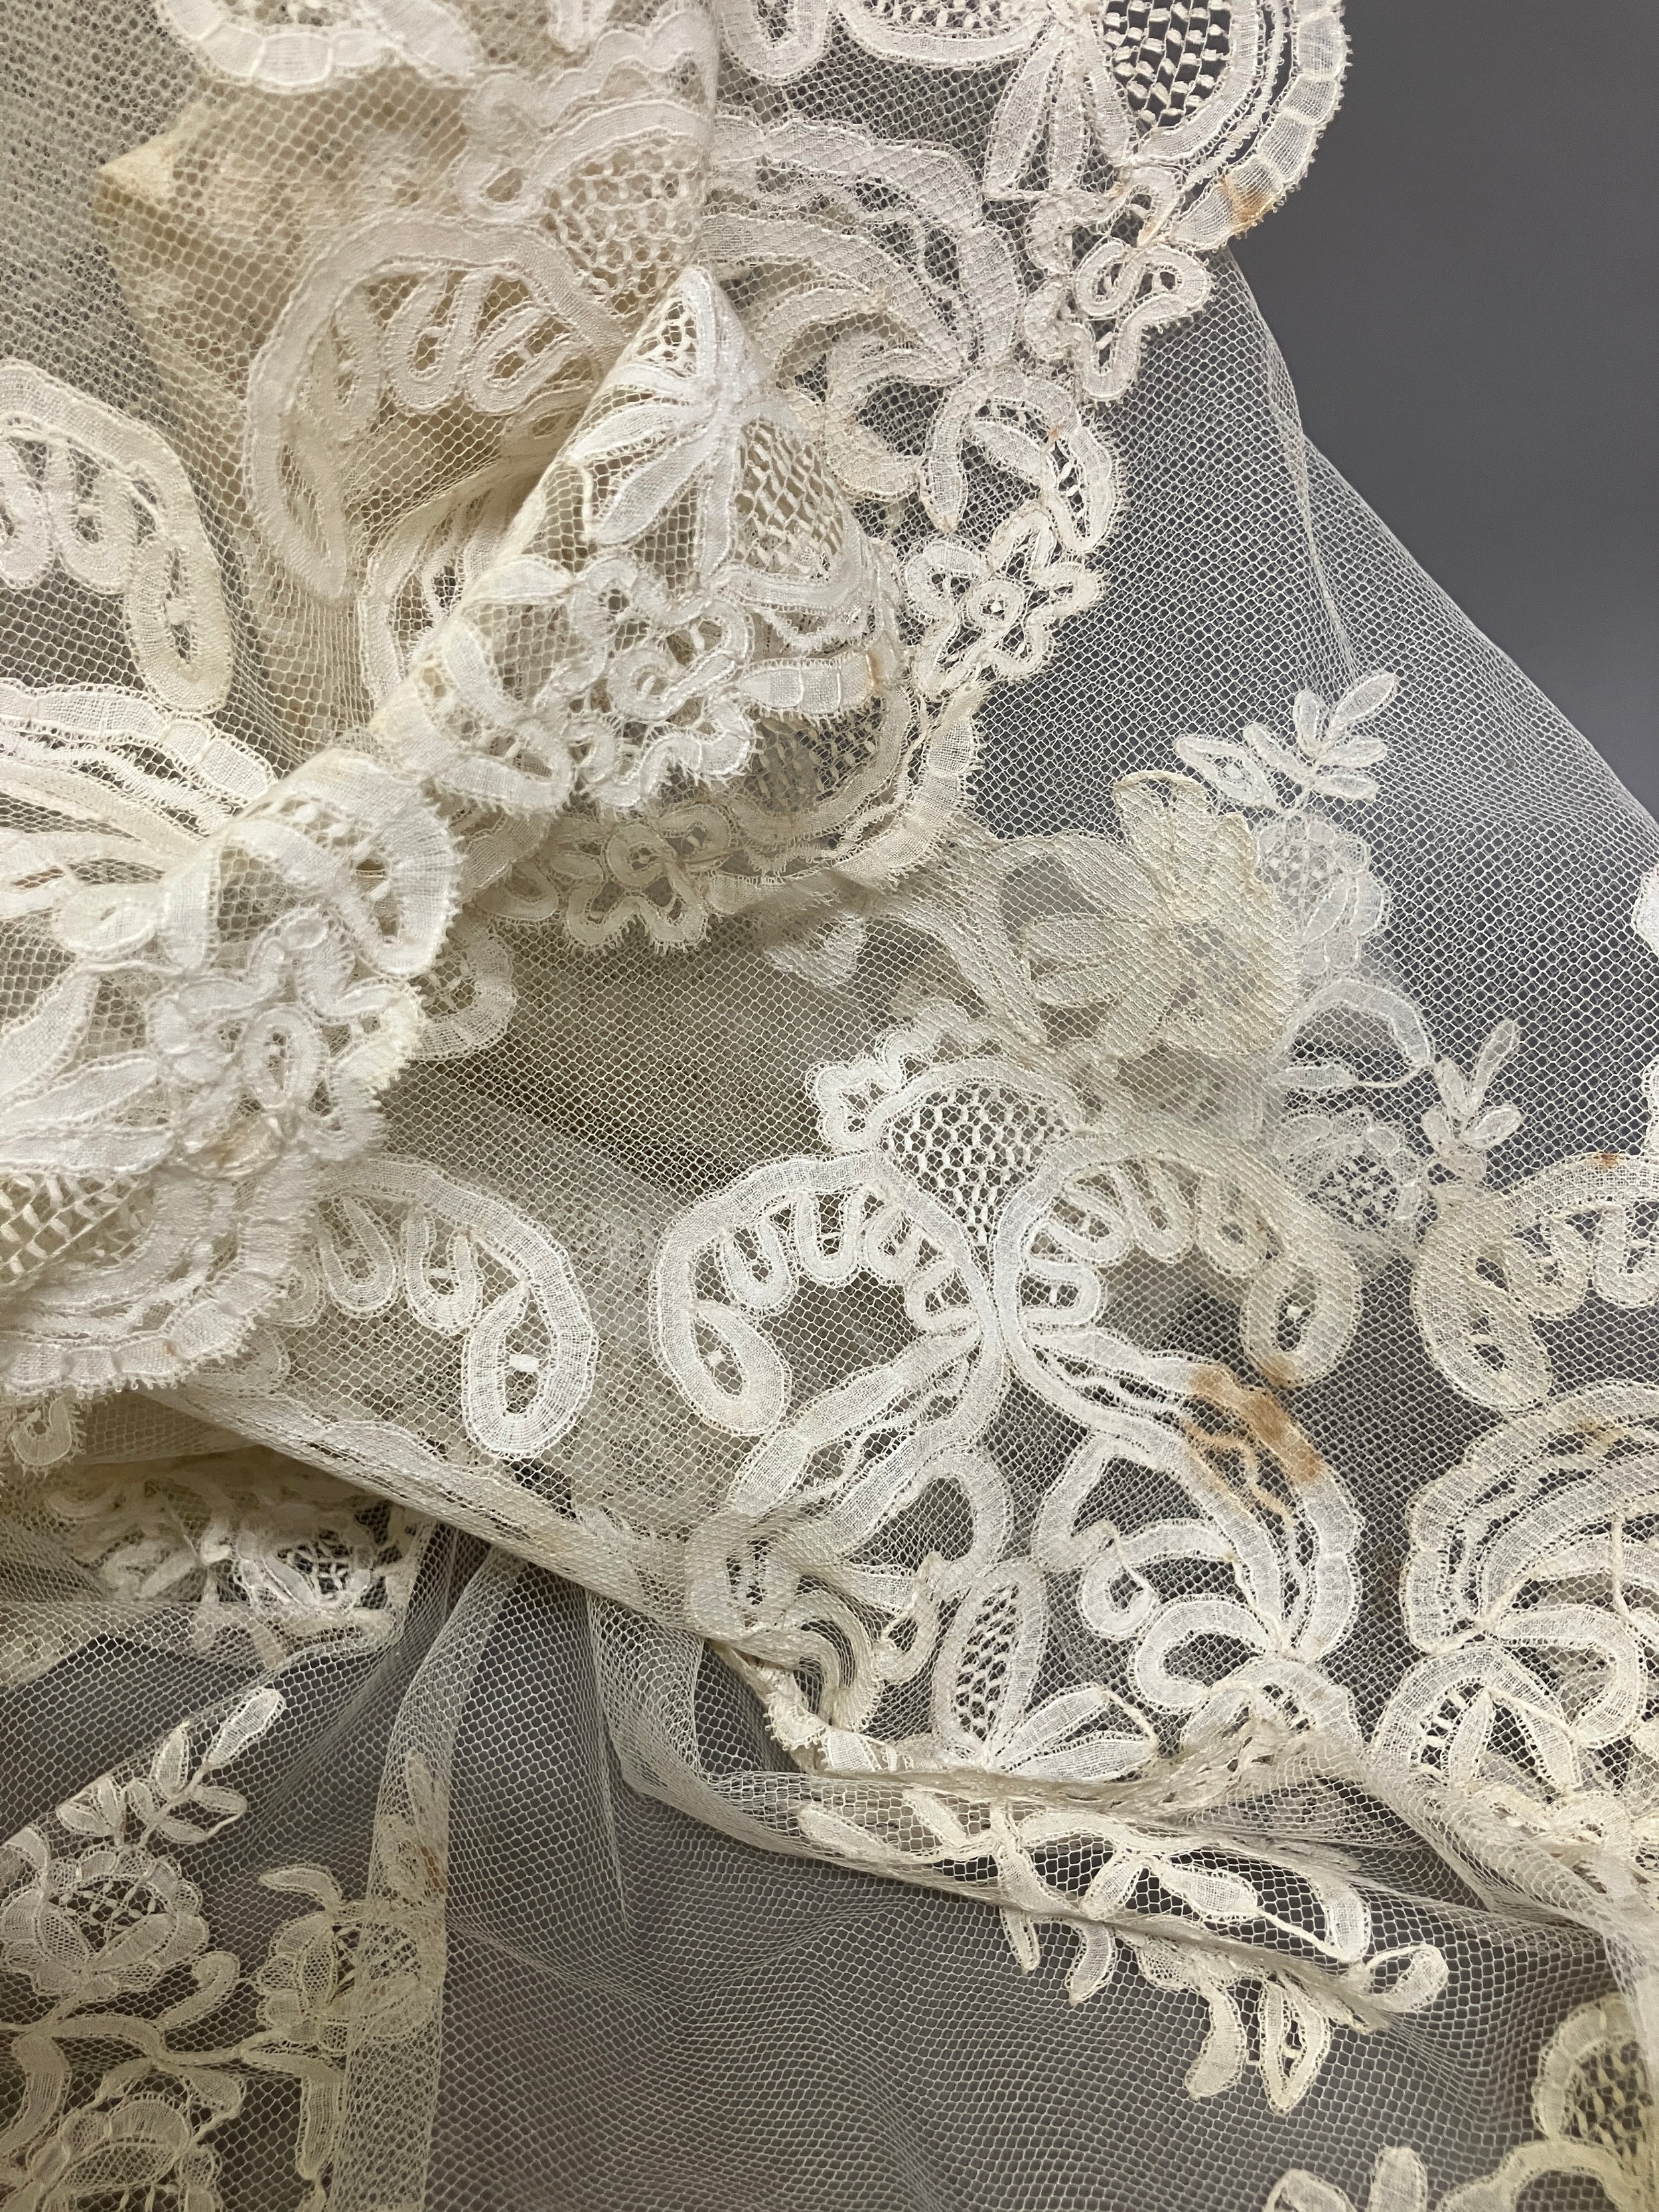 A very large and fine quality late 19th century wedding veil, Honiton Bobbin Appliqué, deep lace - Image 5 of 6